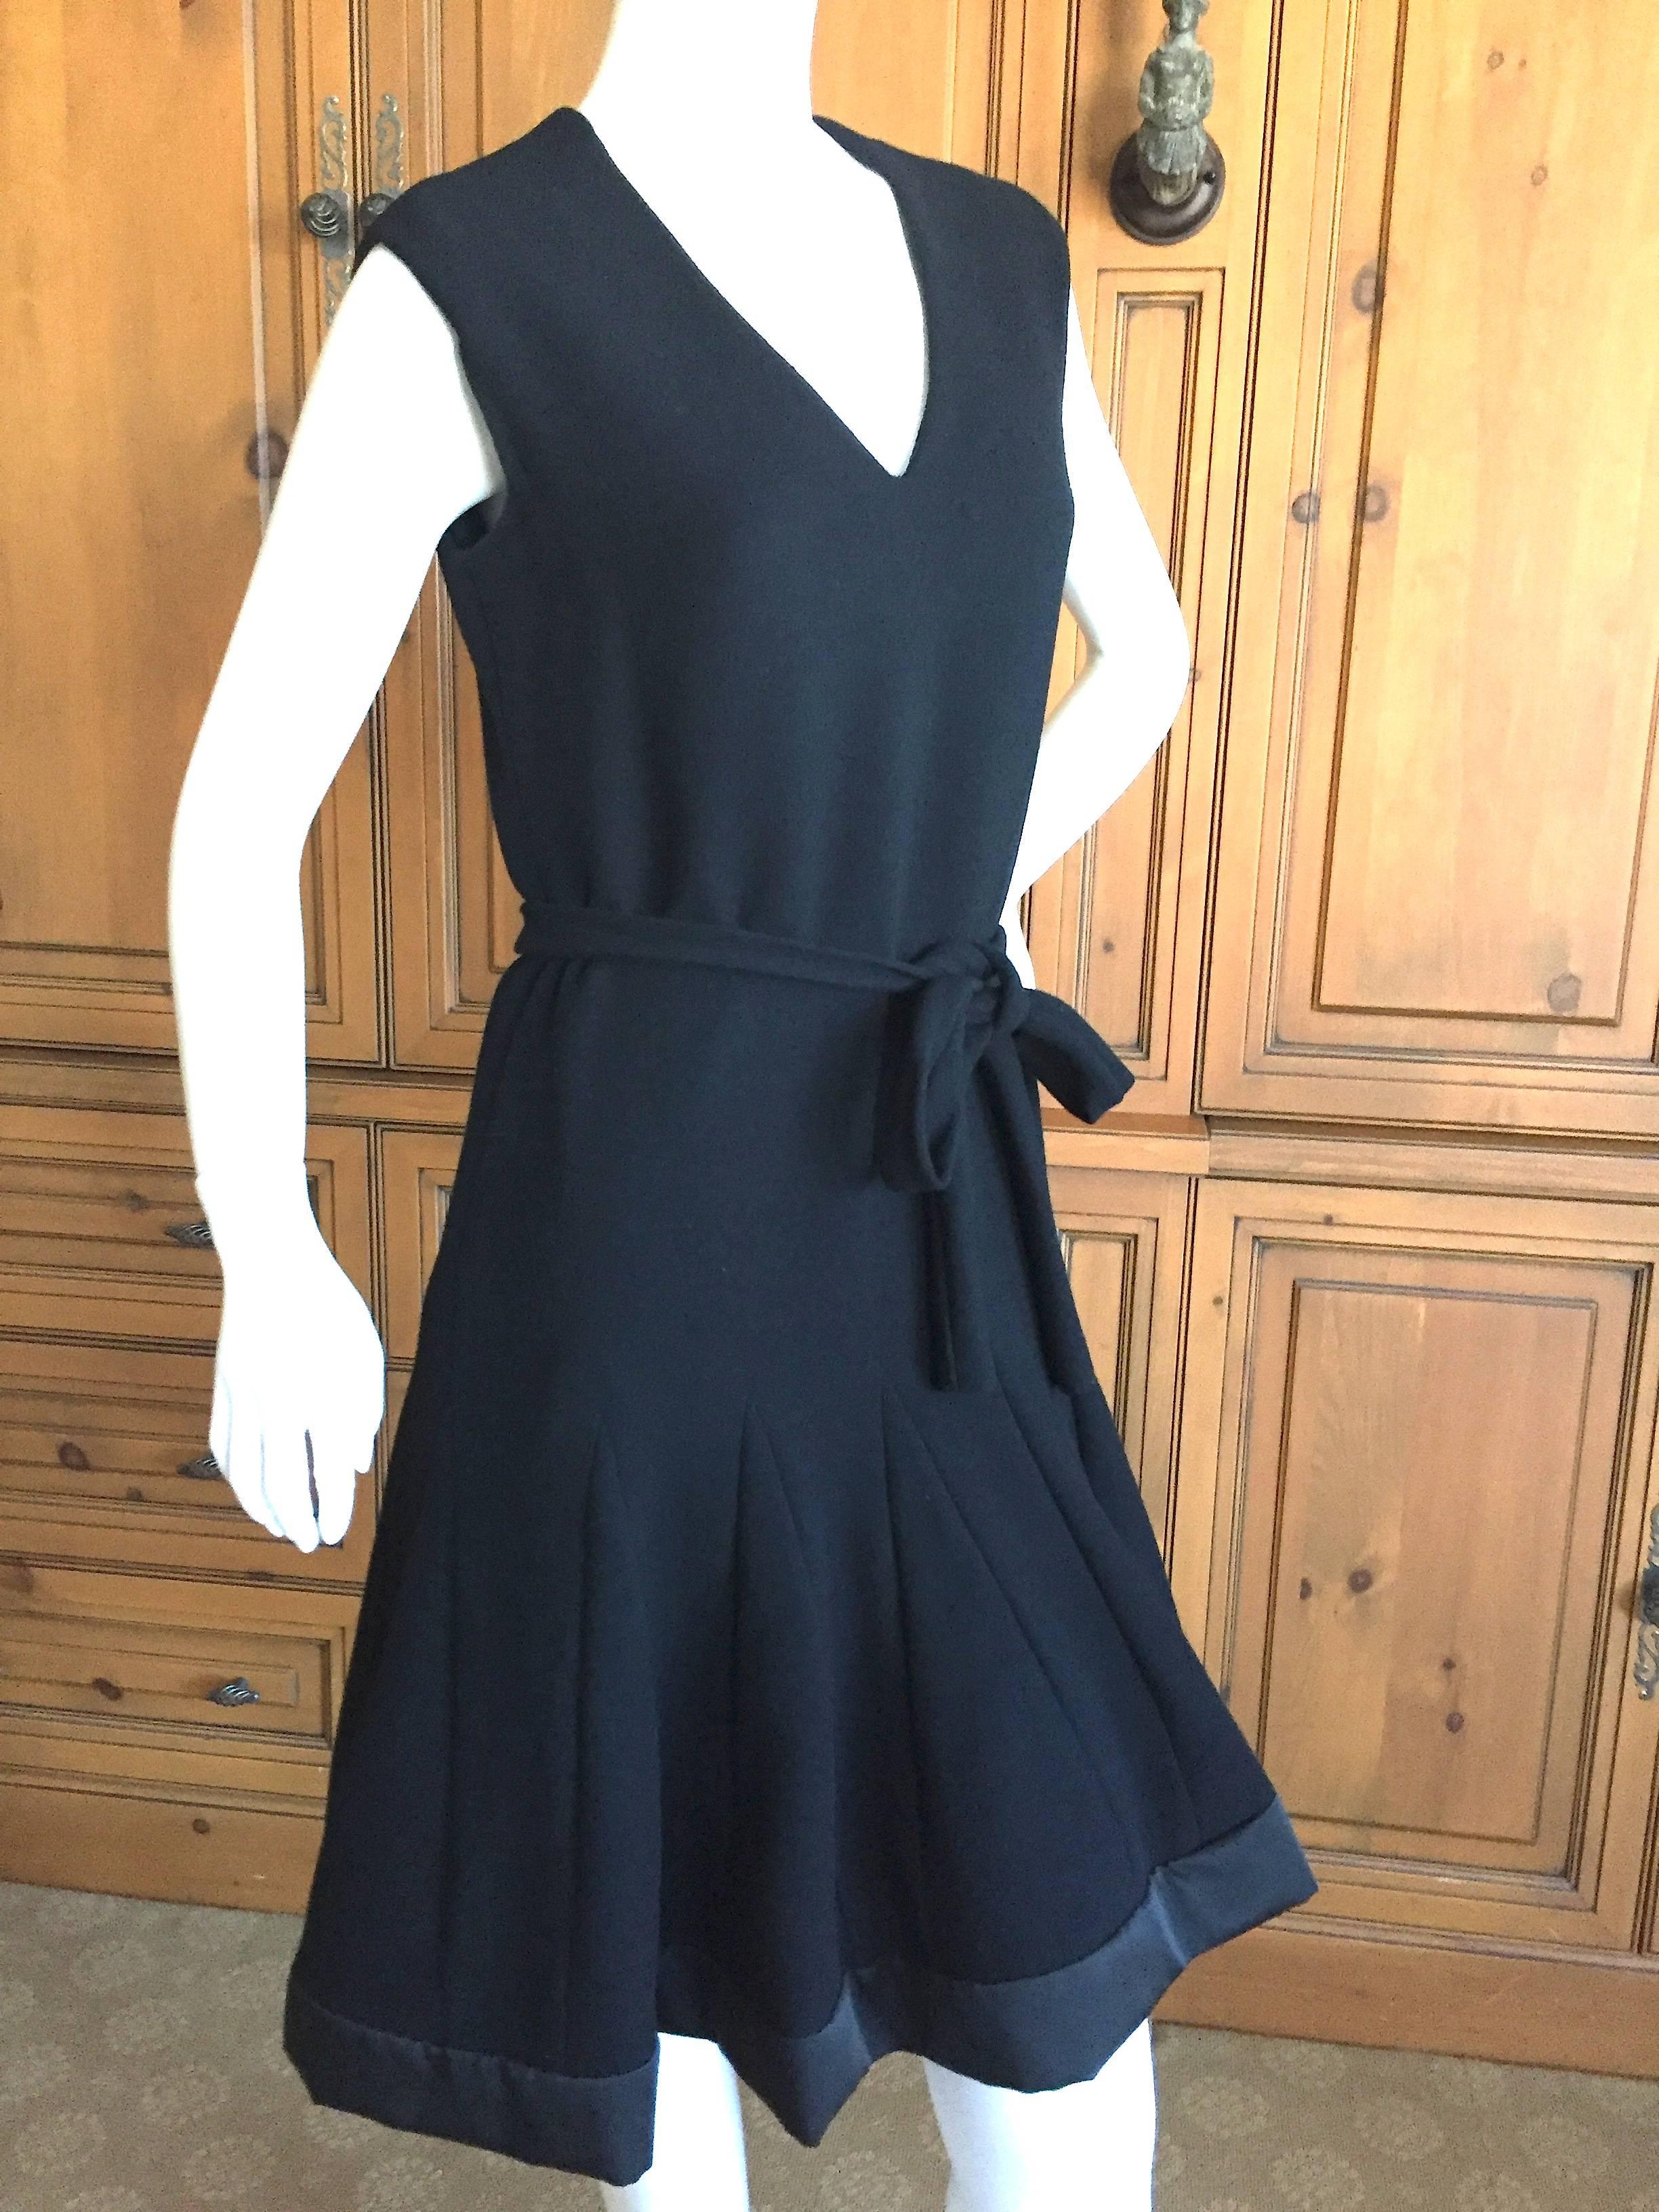 Delightful sleeveless little black dress from Norman Norell.
This is a very rare Norell, I have never seen a sleeveless Norell.
The skirt features inverted V inserts and is edges at the hem with wide grossgrain ribbon.
Lined in silk, the details